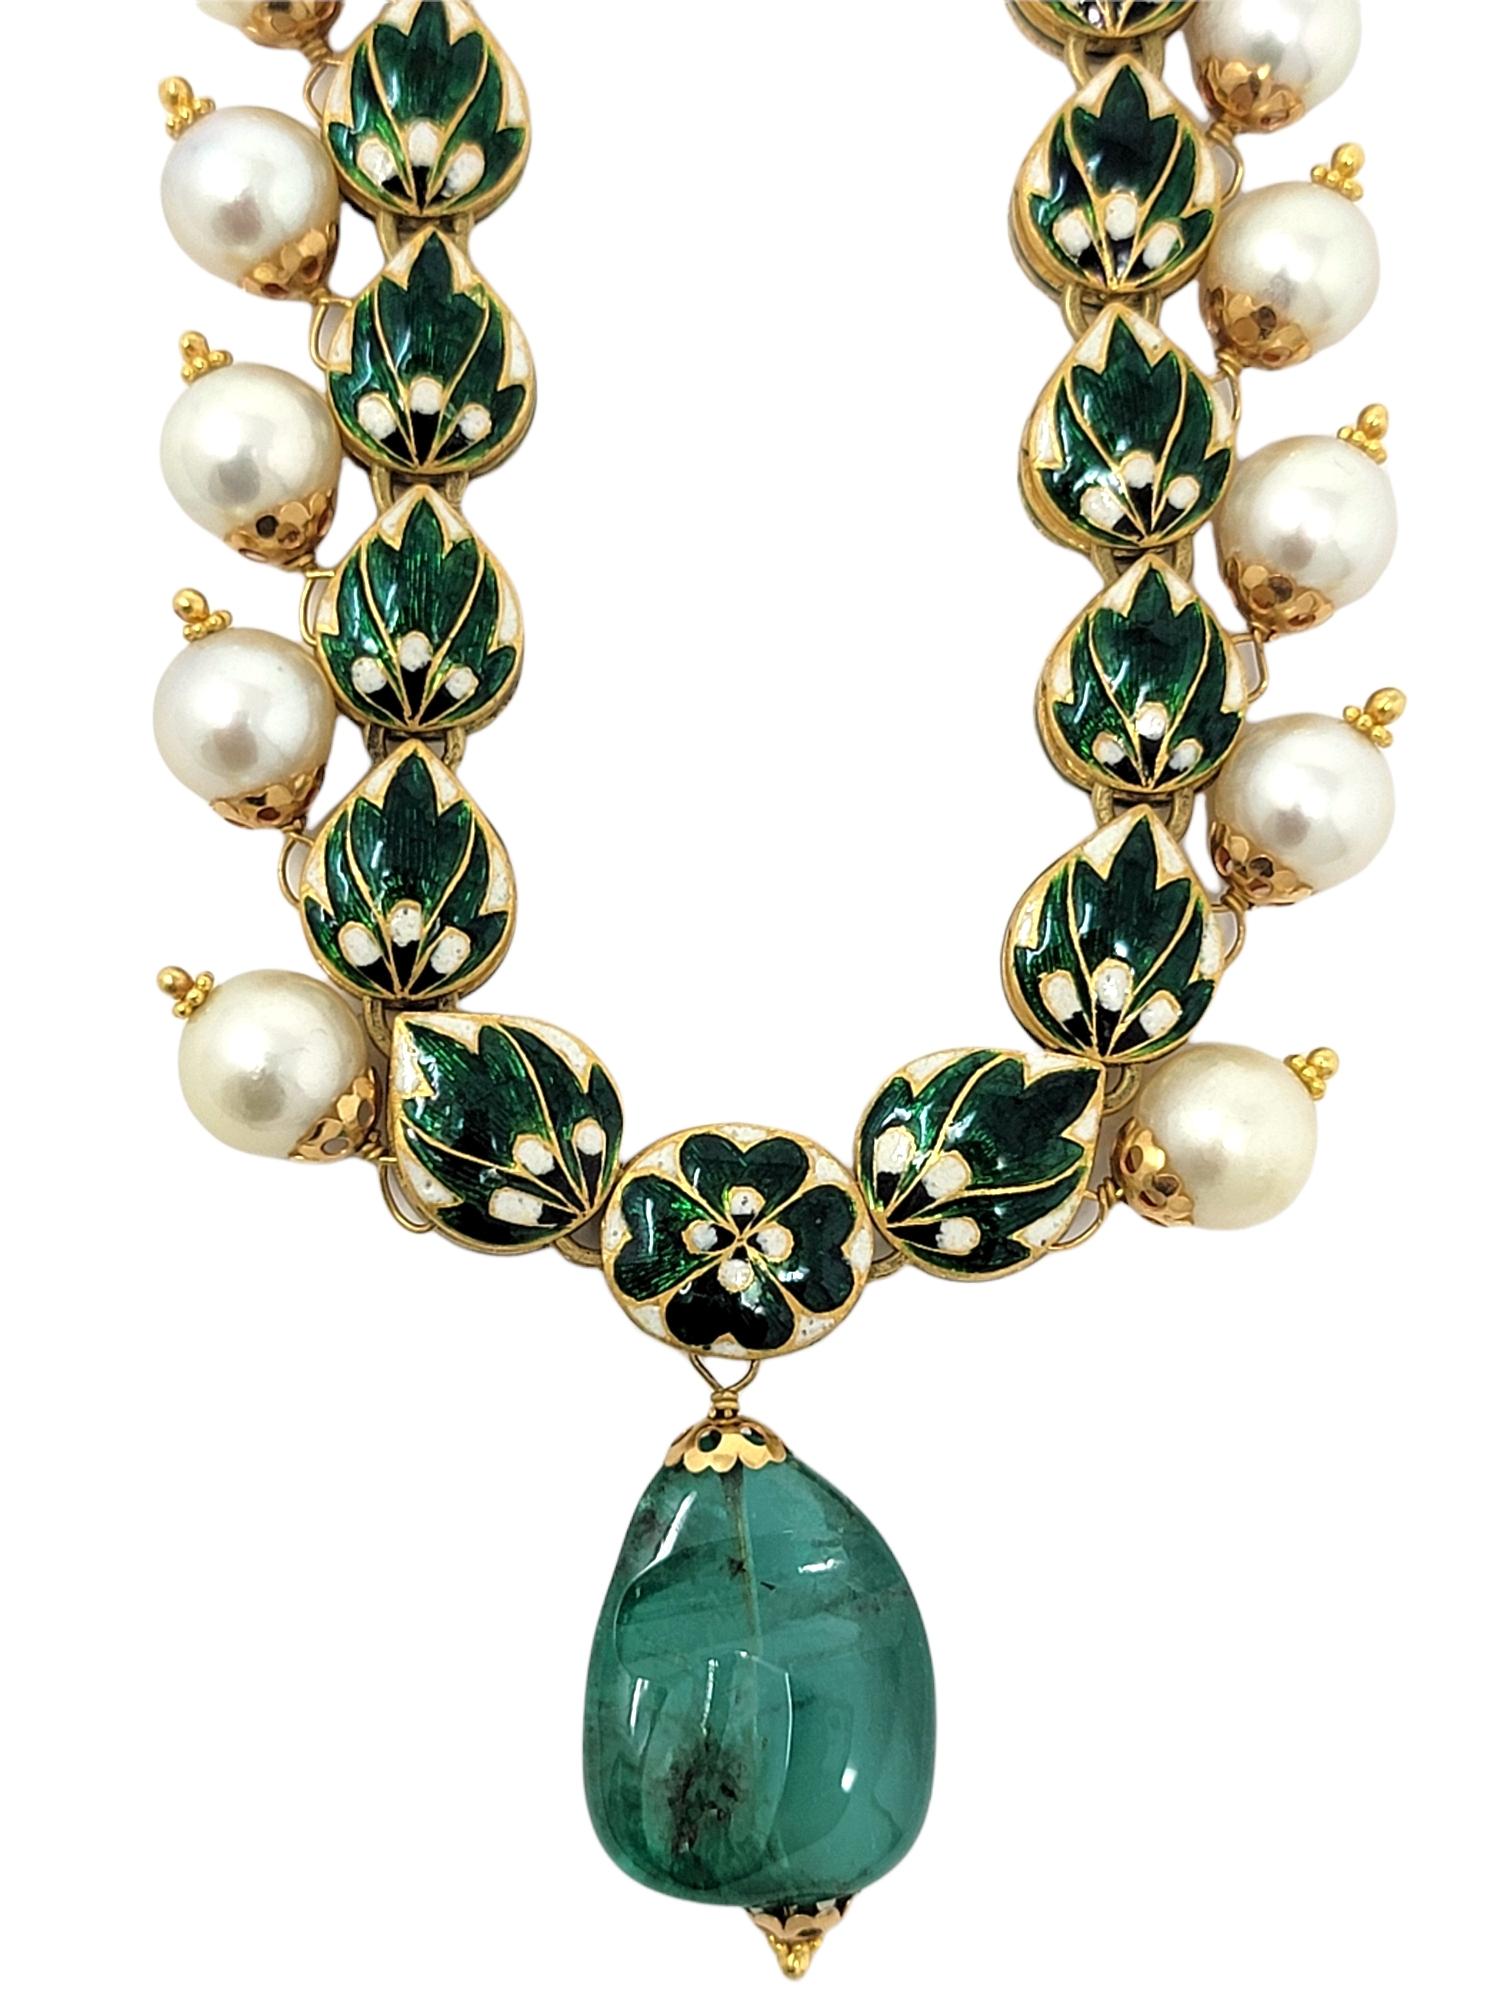 Women's Vintage Handmade Mother of Pearl, Uncut Diamond and Emerald Stone Polki Necklace For Sale